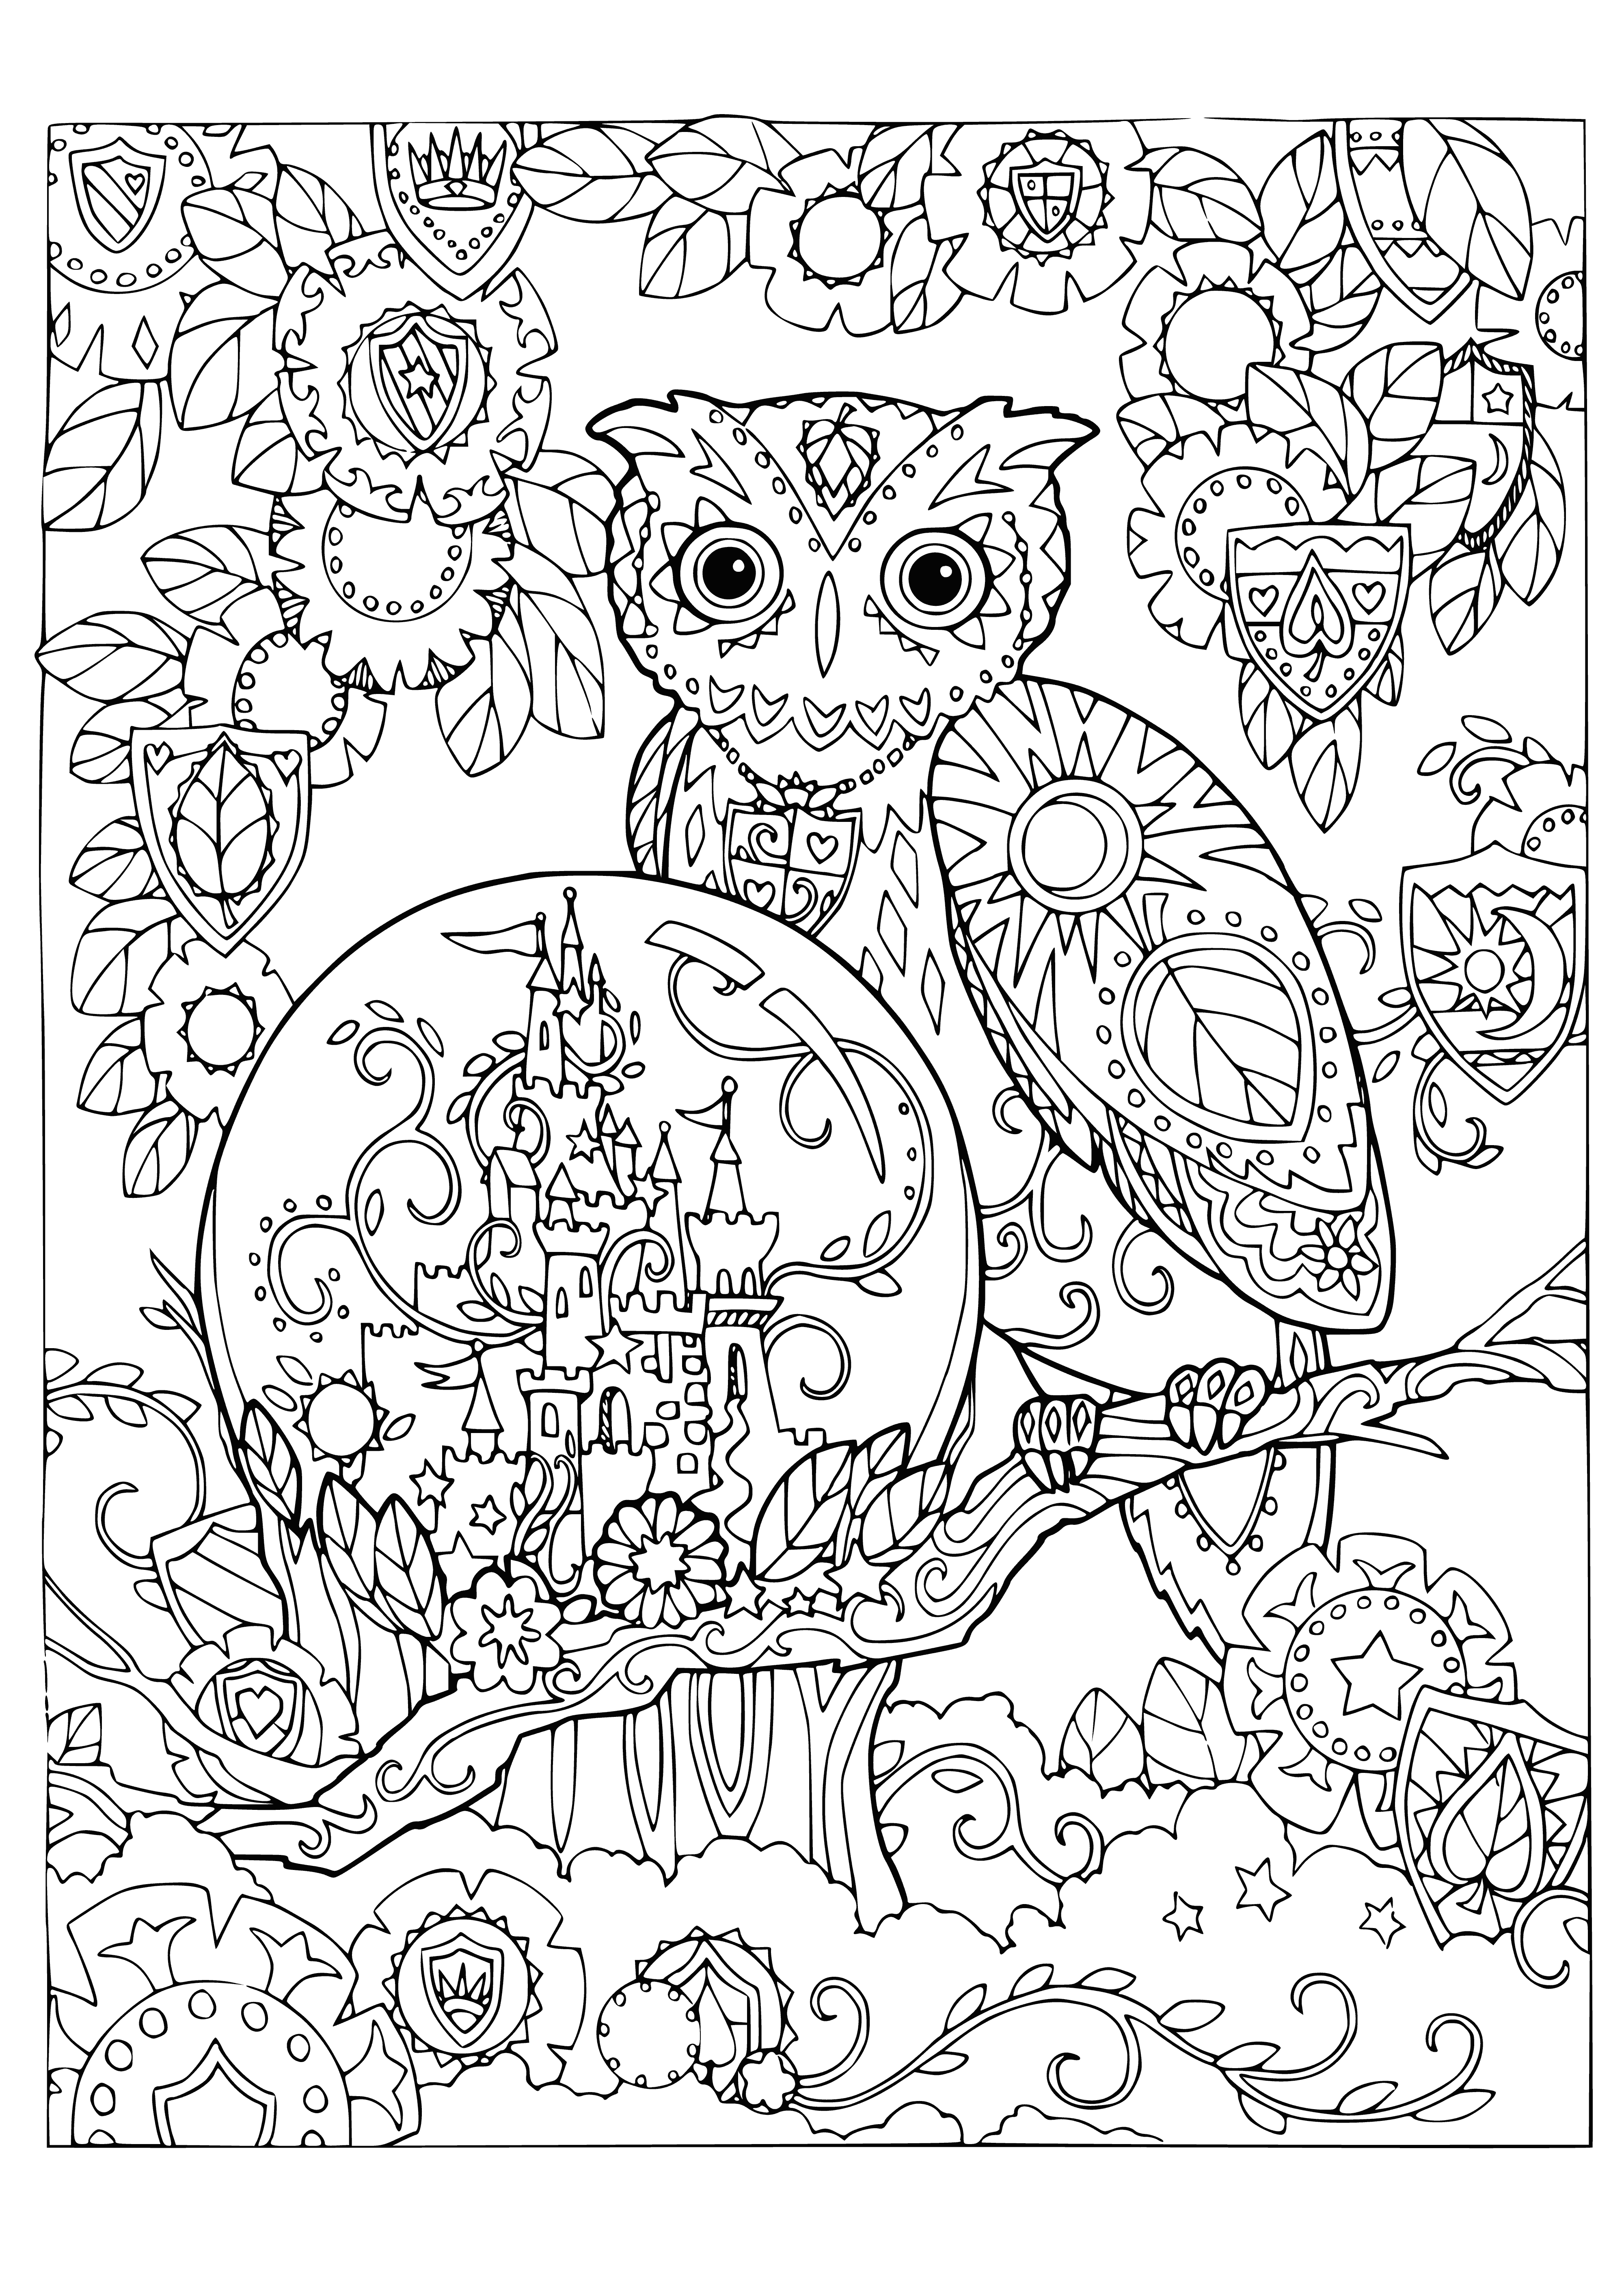 coloring page: Two owls gaze into a magic ball that glows, one admiring it, the other admiring it's companion.